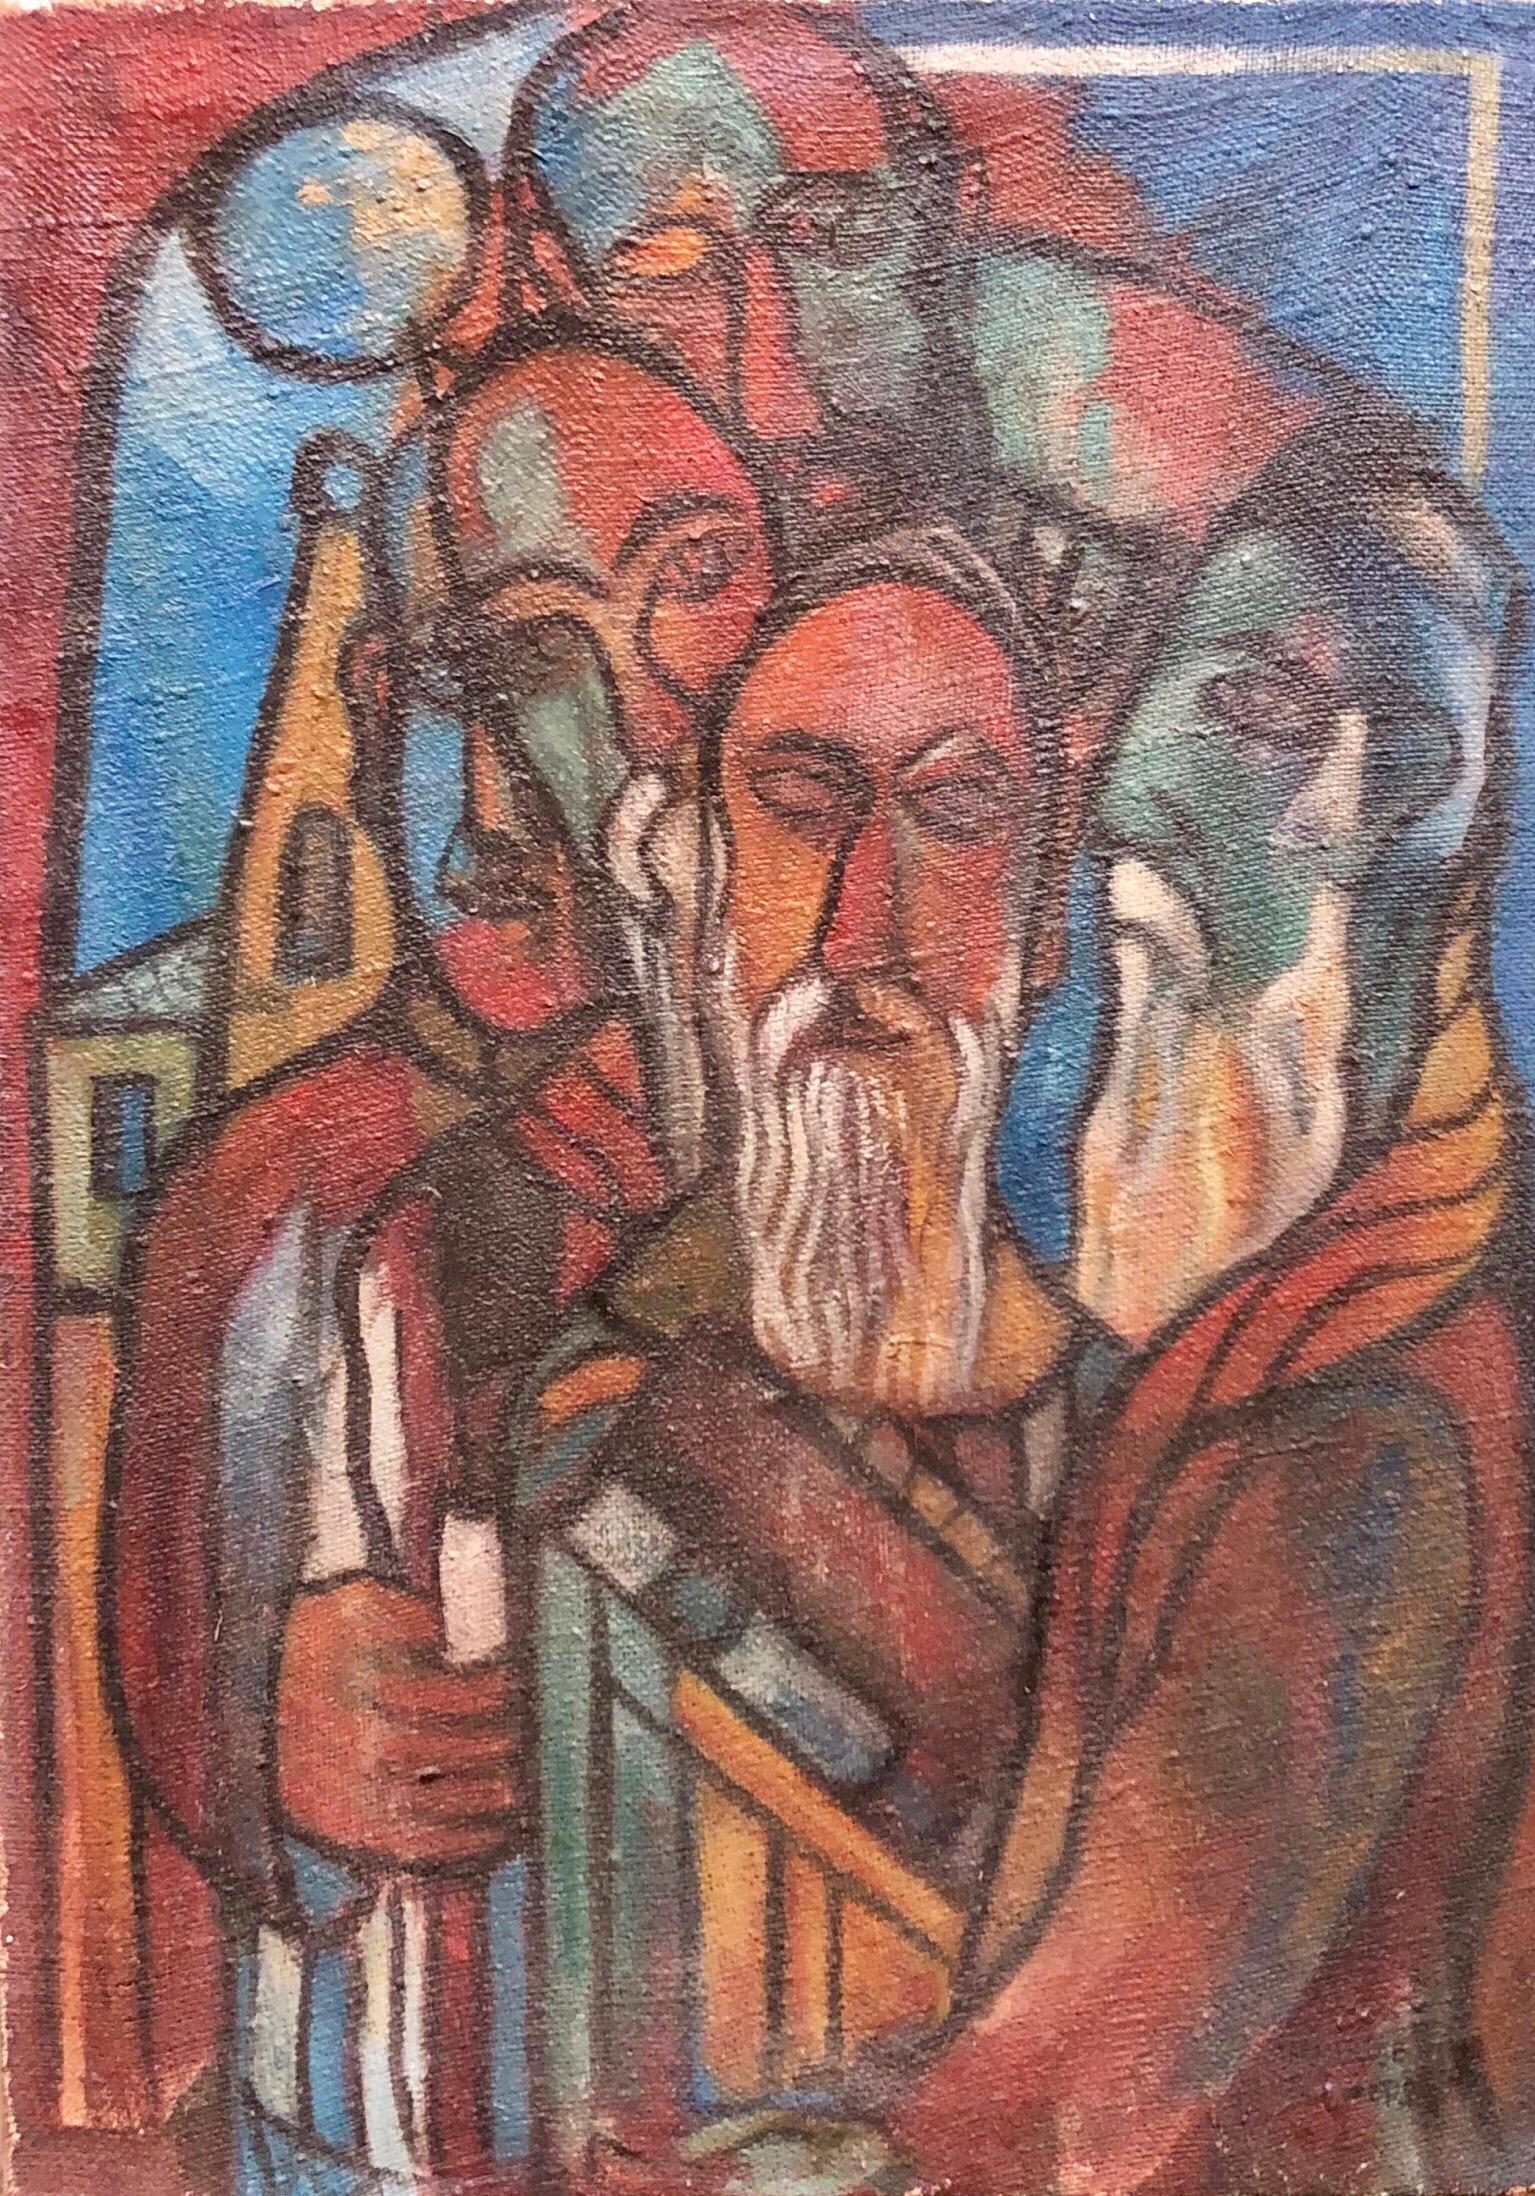 This is a modernist Judaic painting of a Jewish scene of the Kiddush Levanah prayer.  The monthly hebrew blessing on the new moon. It is not dated but I am estimating it to the 1940s
It is signed Maurice S*** but i cannot make out the last name. I